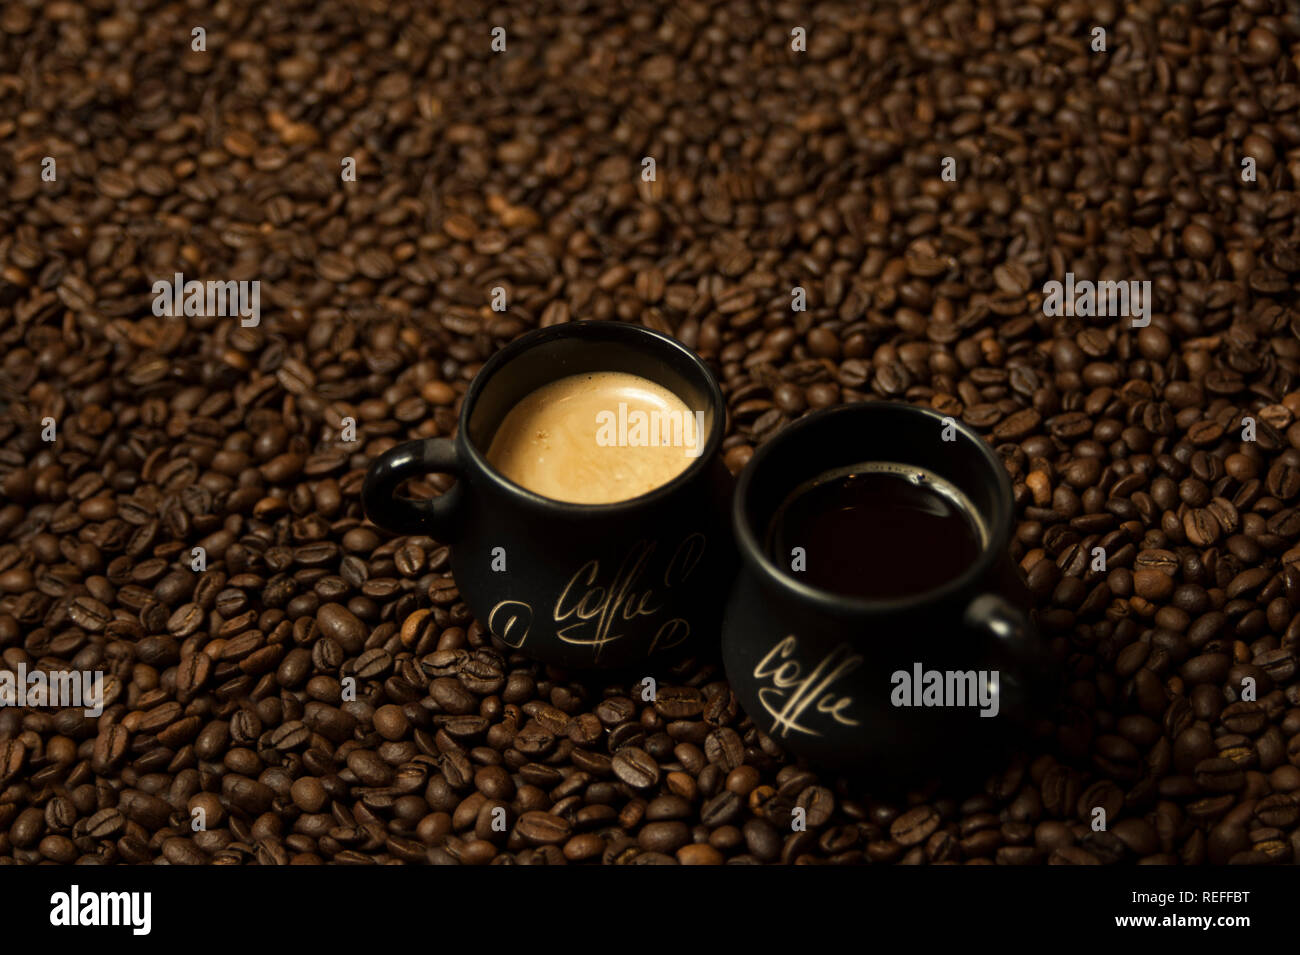 A cup of black coffee with milk standing on coffee beans. A healthy breakfast concept. Stock Photo